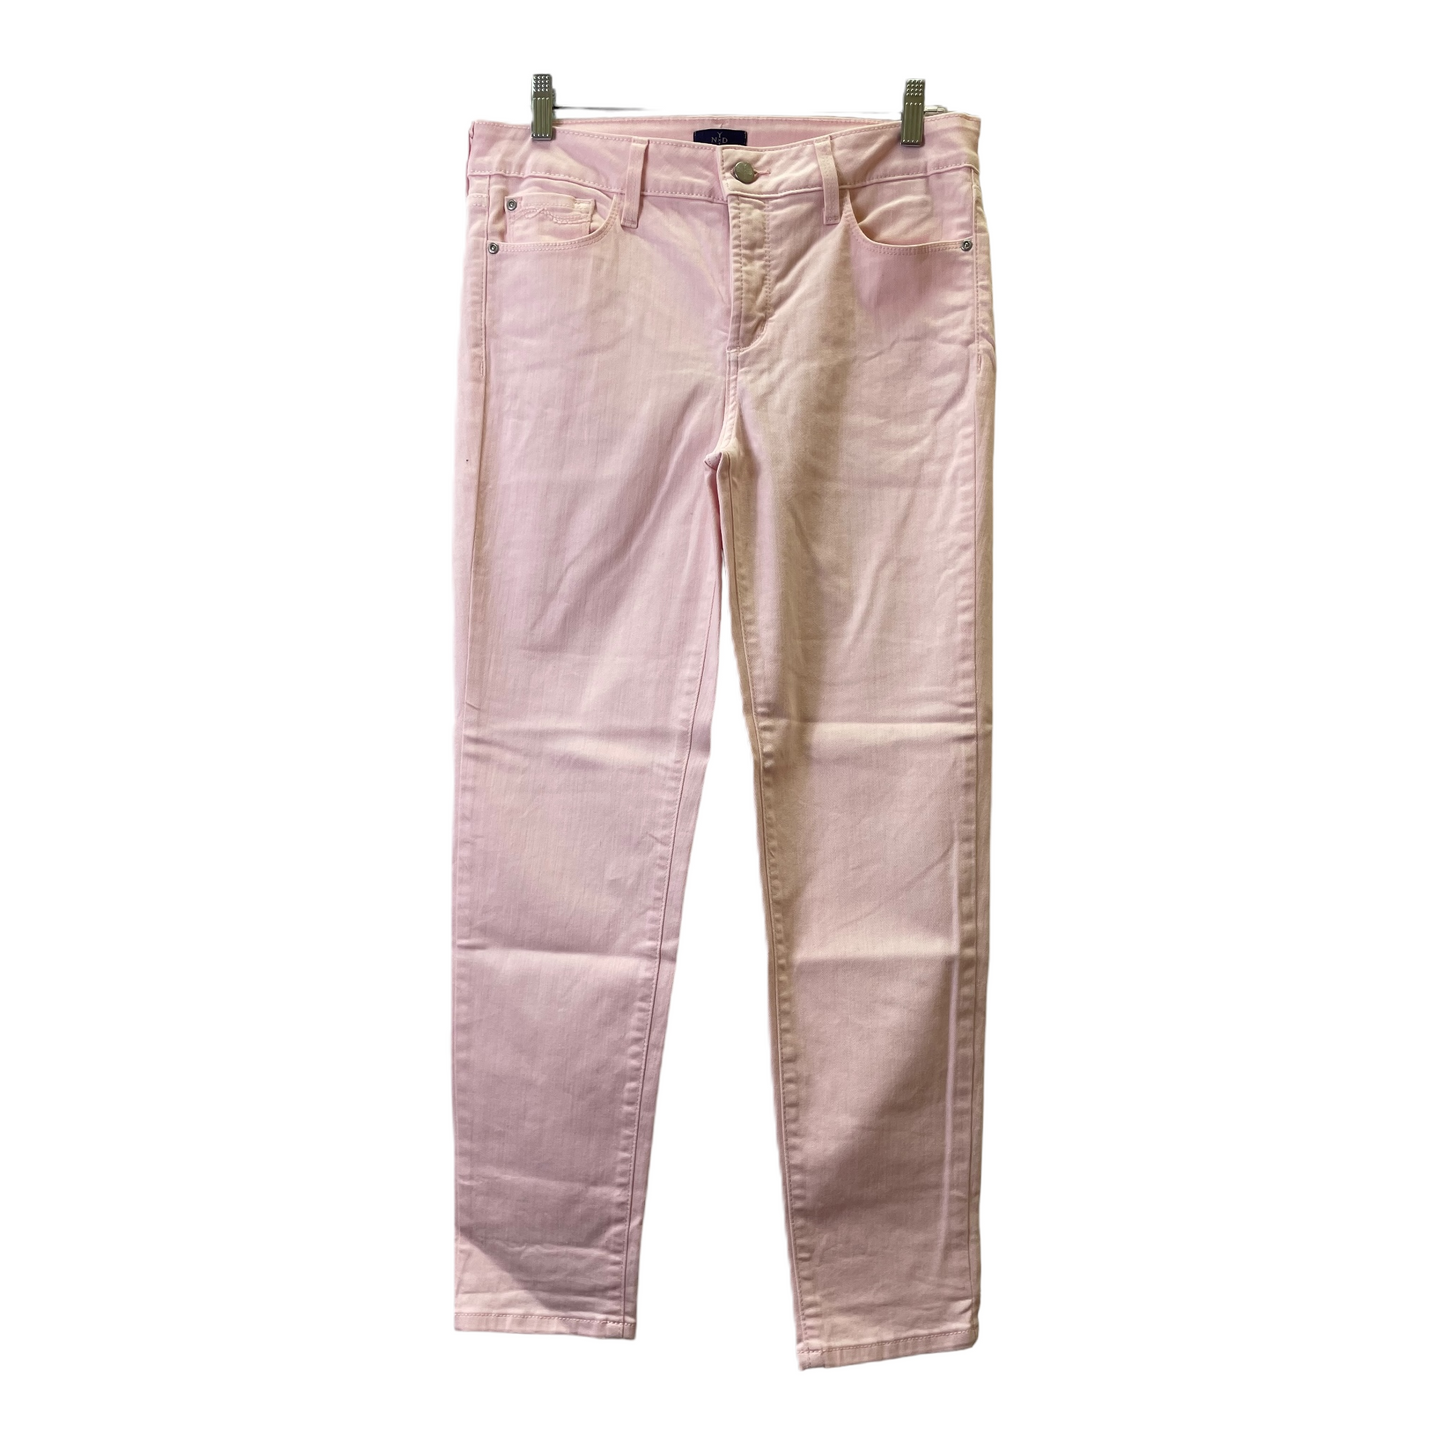 Pink Jeans Straight By Not Your Daughters Jeans, Size: 8